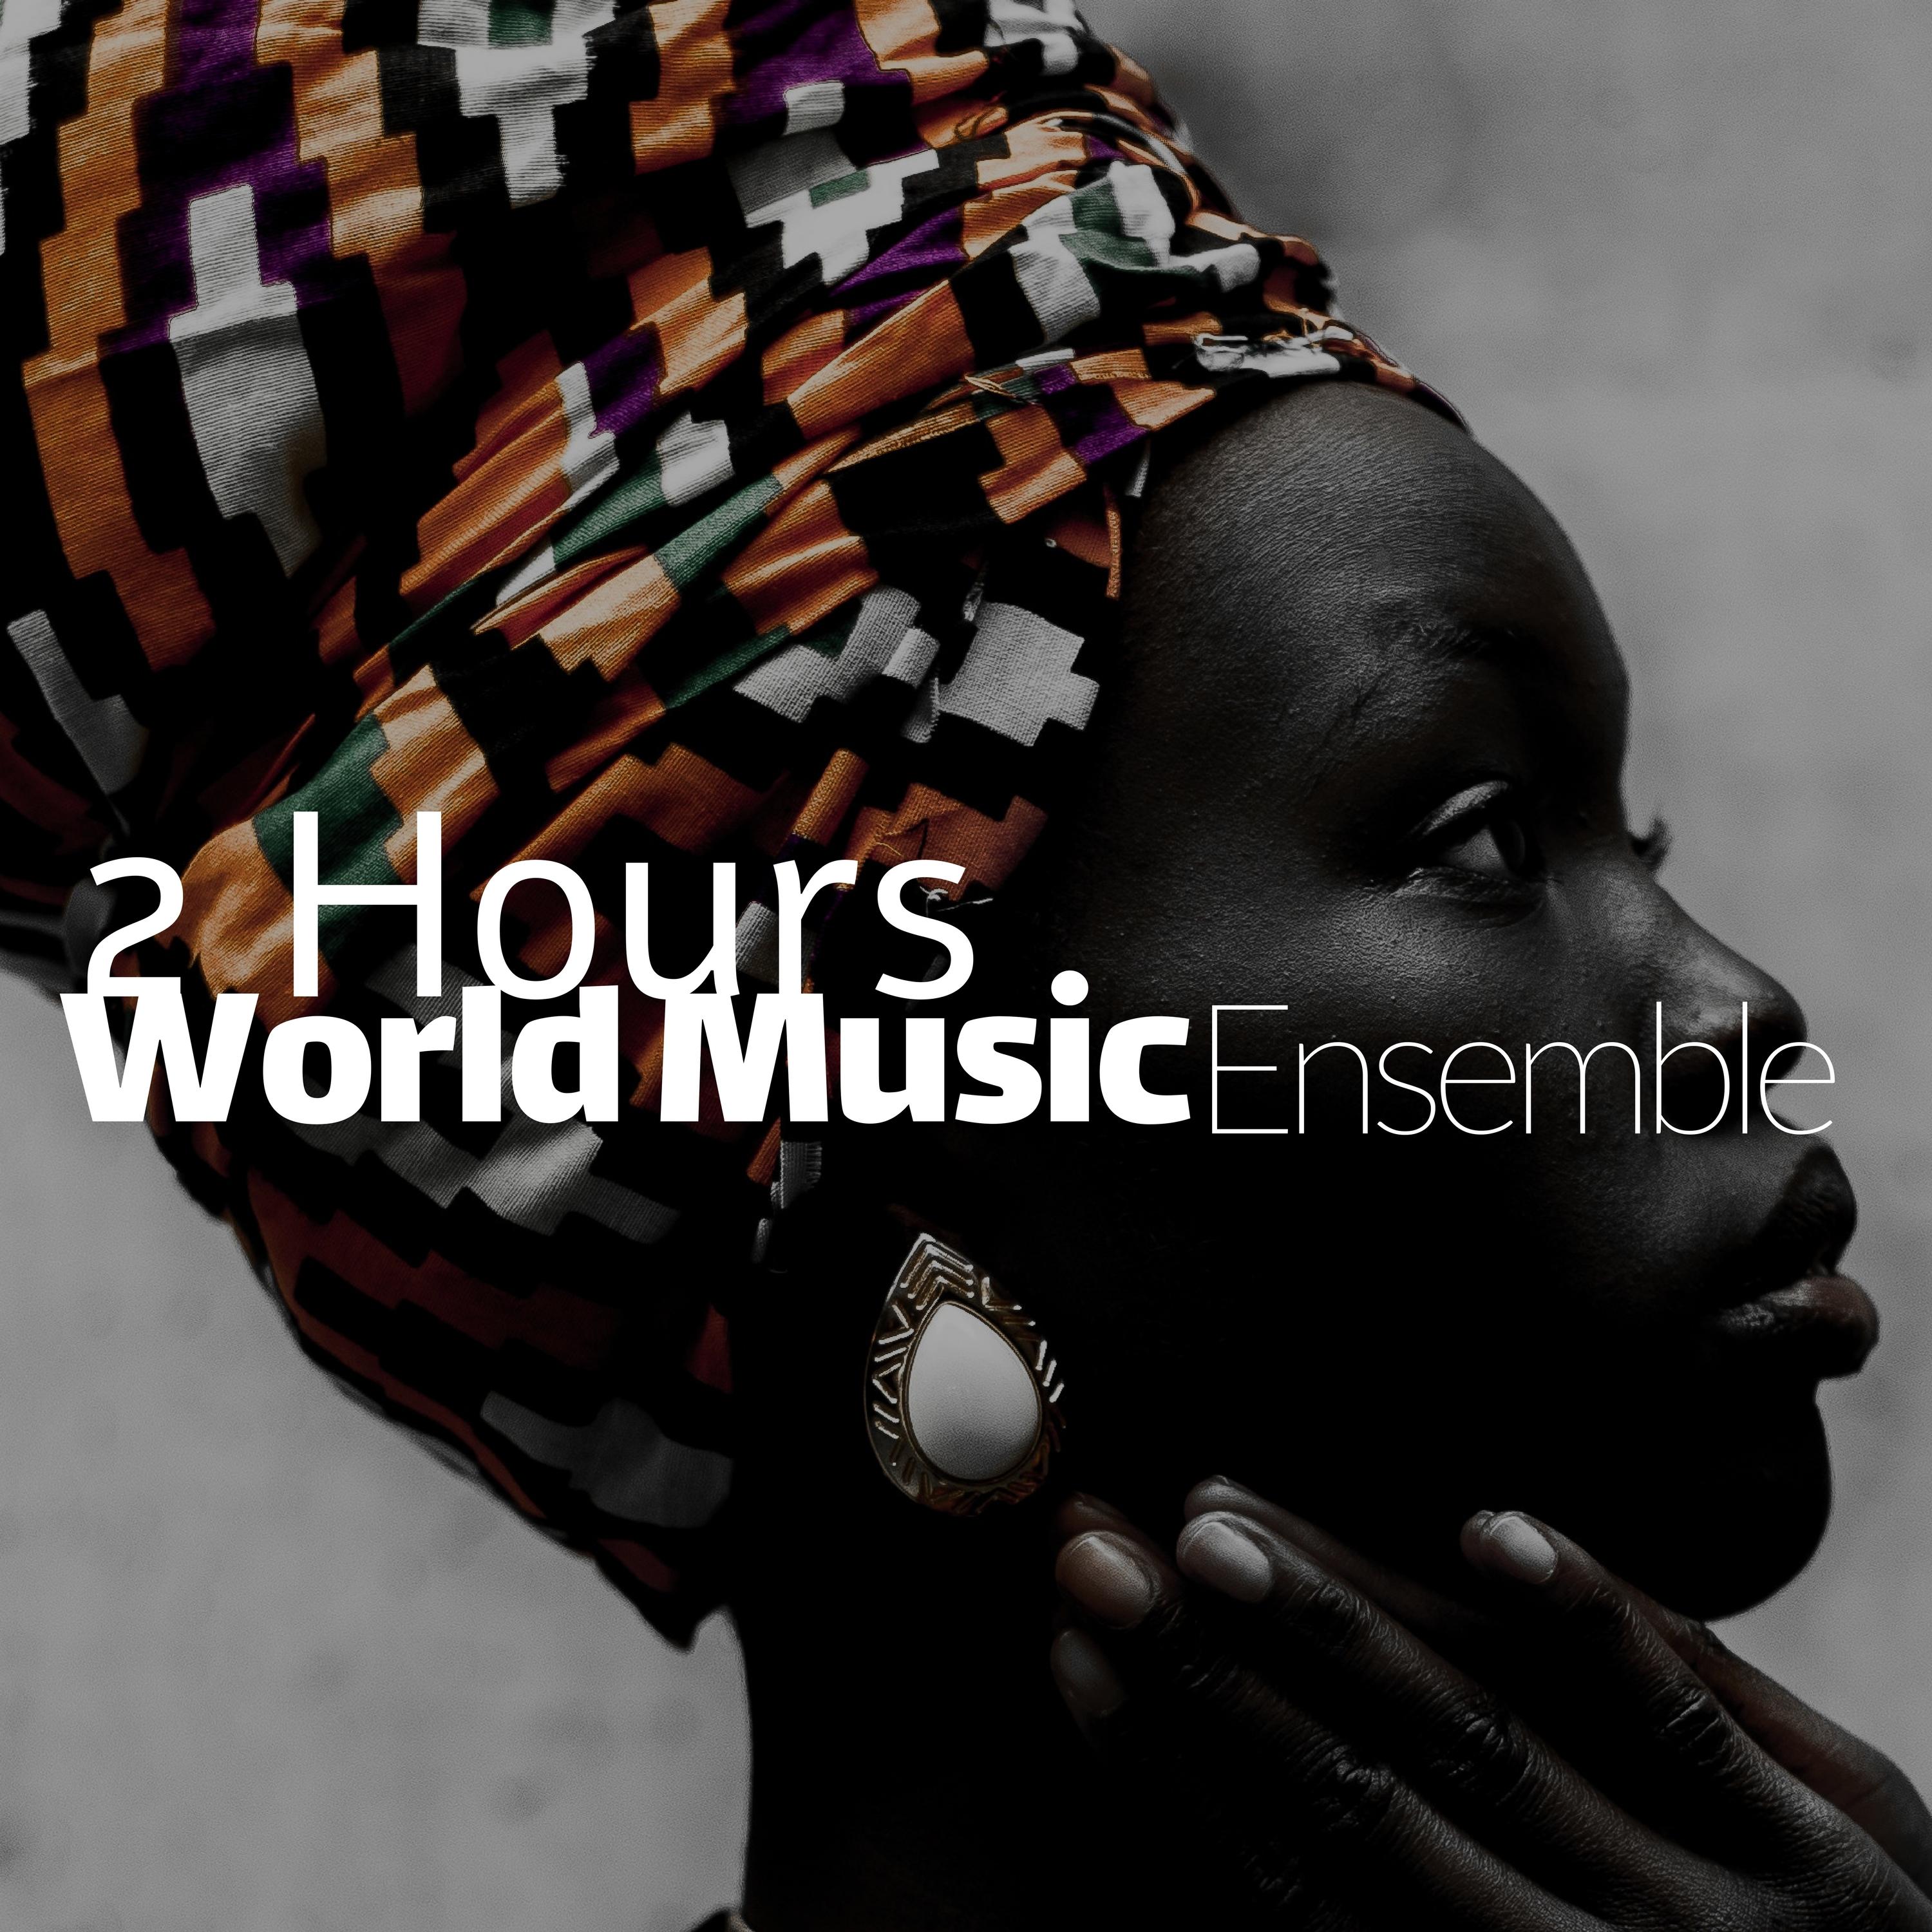 World Music Ensemble: 2 Hours of Relaxing Ethnic Songs, African Dance Cerimony Music, Indian Tribal Music, Folk Music